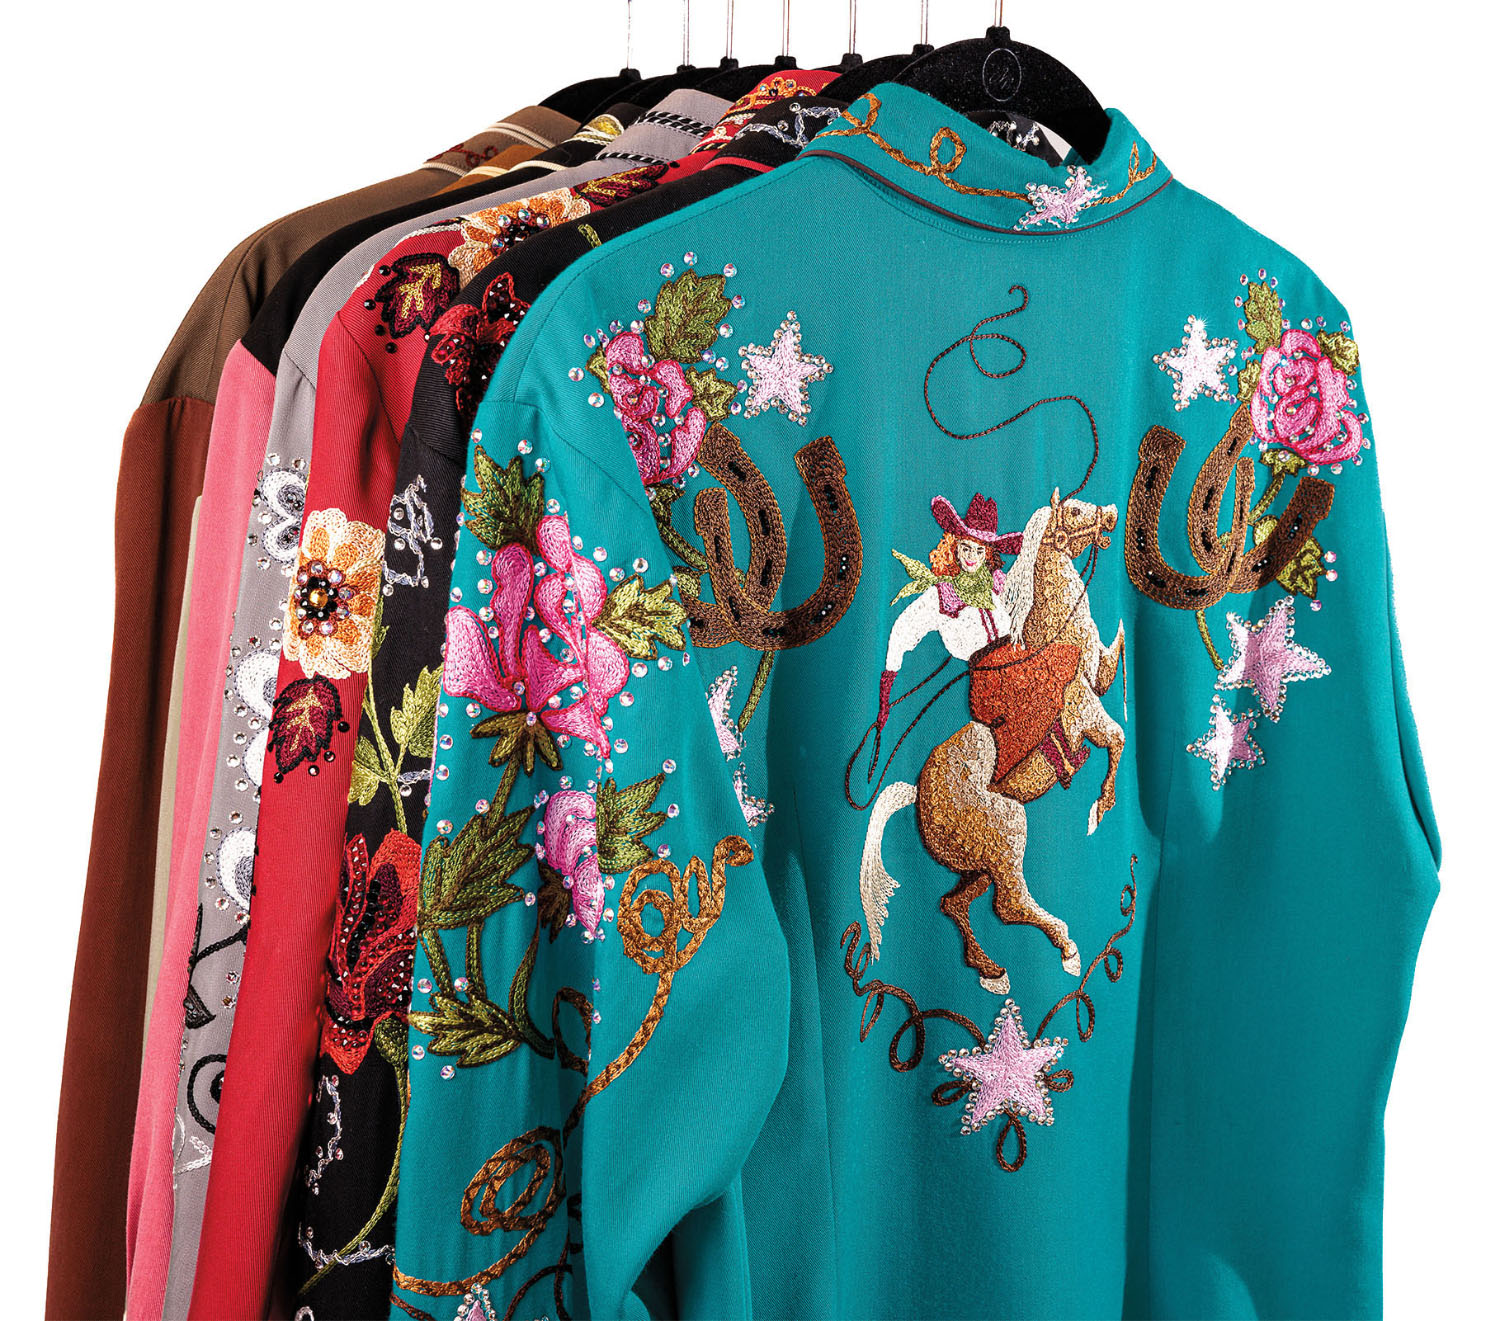 A rack of brightly colored clothing featuring intricate designs of wildflowers, cowgirls and cacti